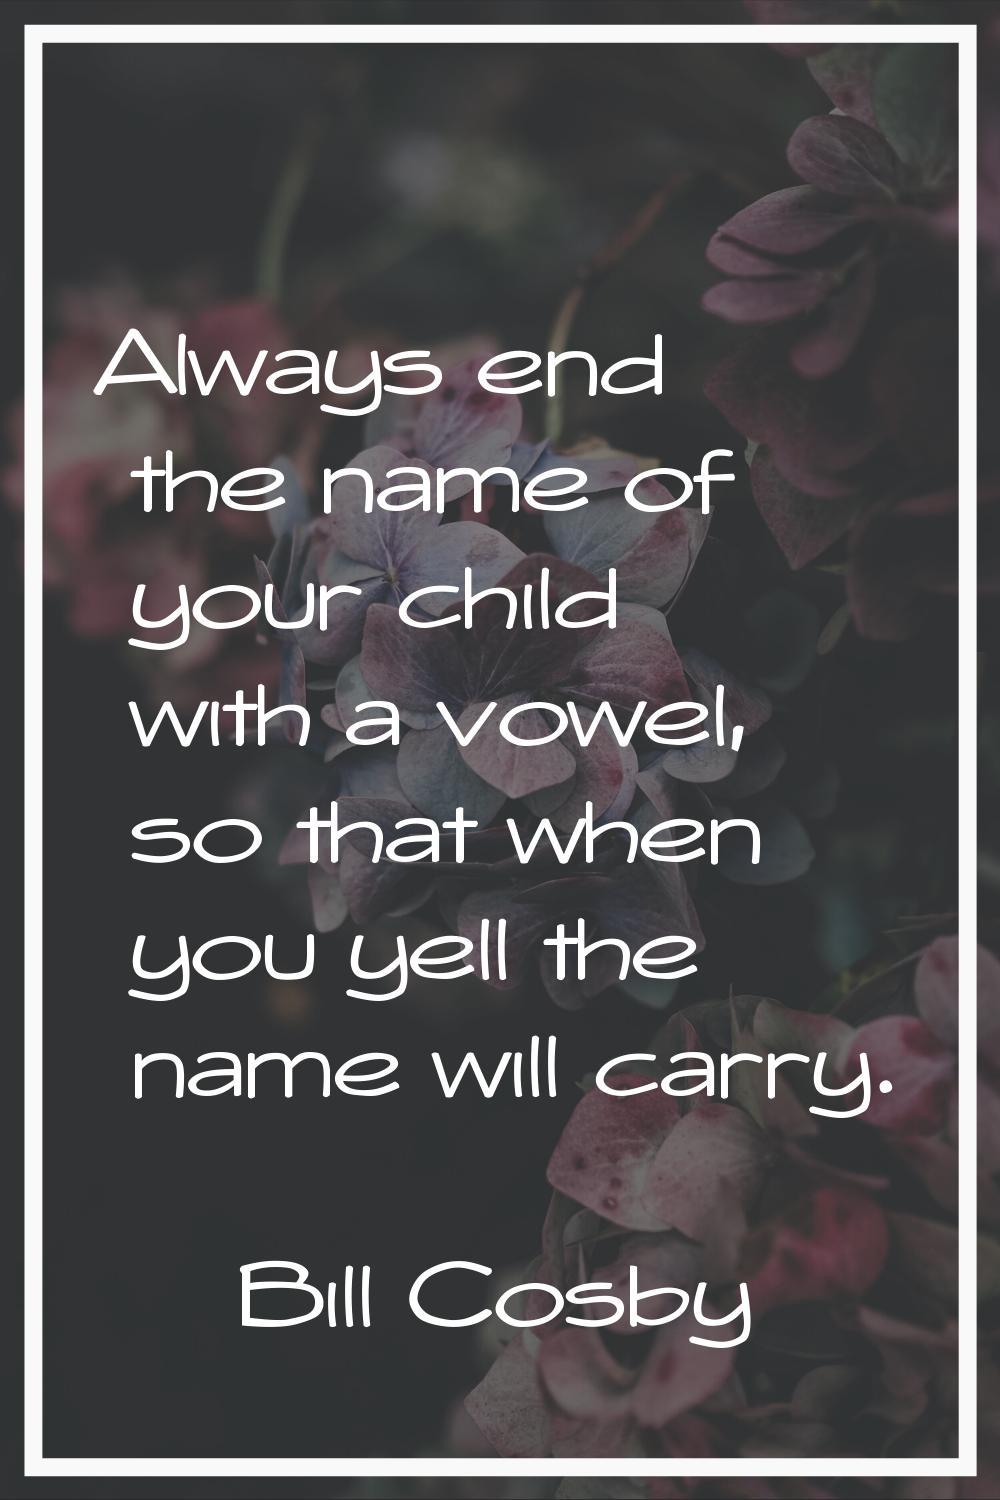 Always end the name of your child with a vowel, so that when you yell the name will carry.